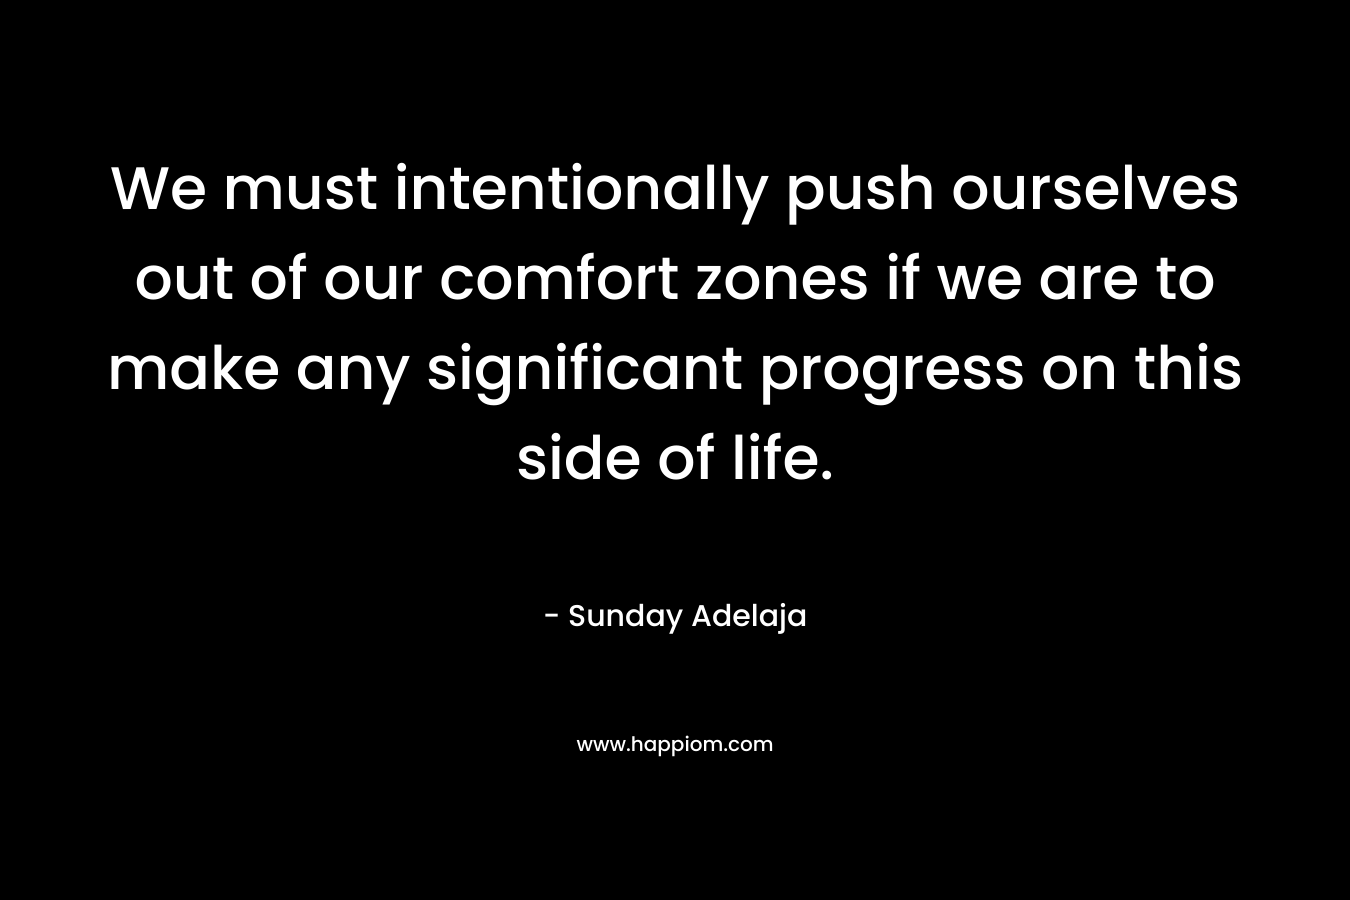 We must intentionally push ourselves out of our comfort zones if we are to make any significant progress on this side of life.